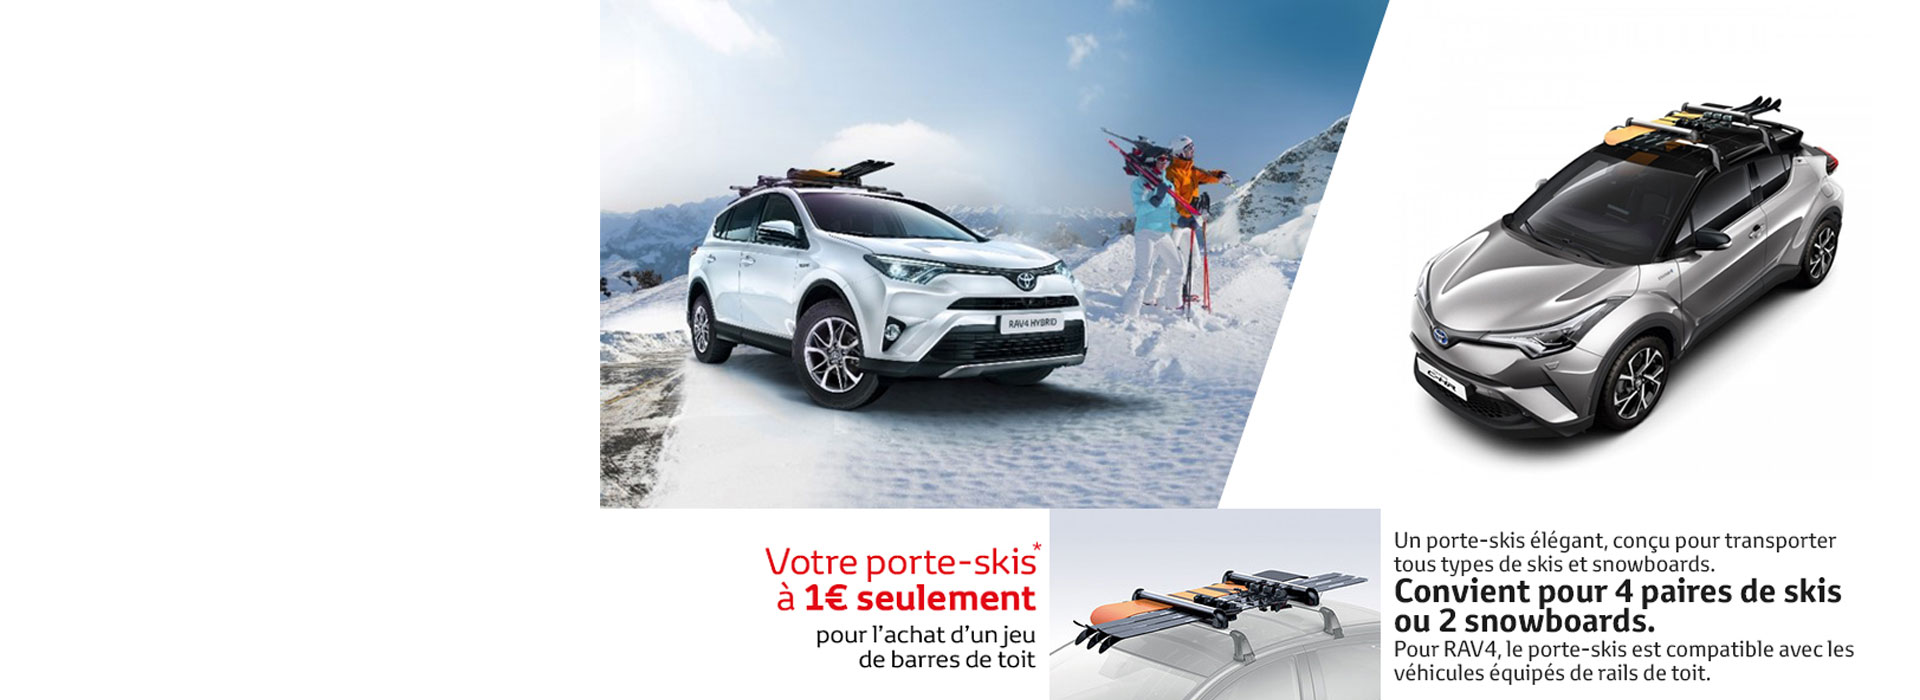 Offre porte-skis à 1 € seulement Toyota Magny